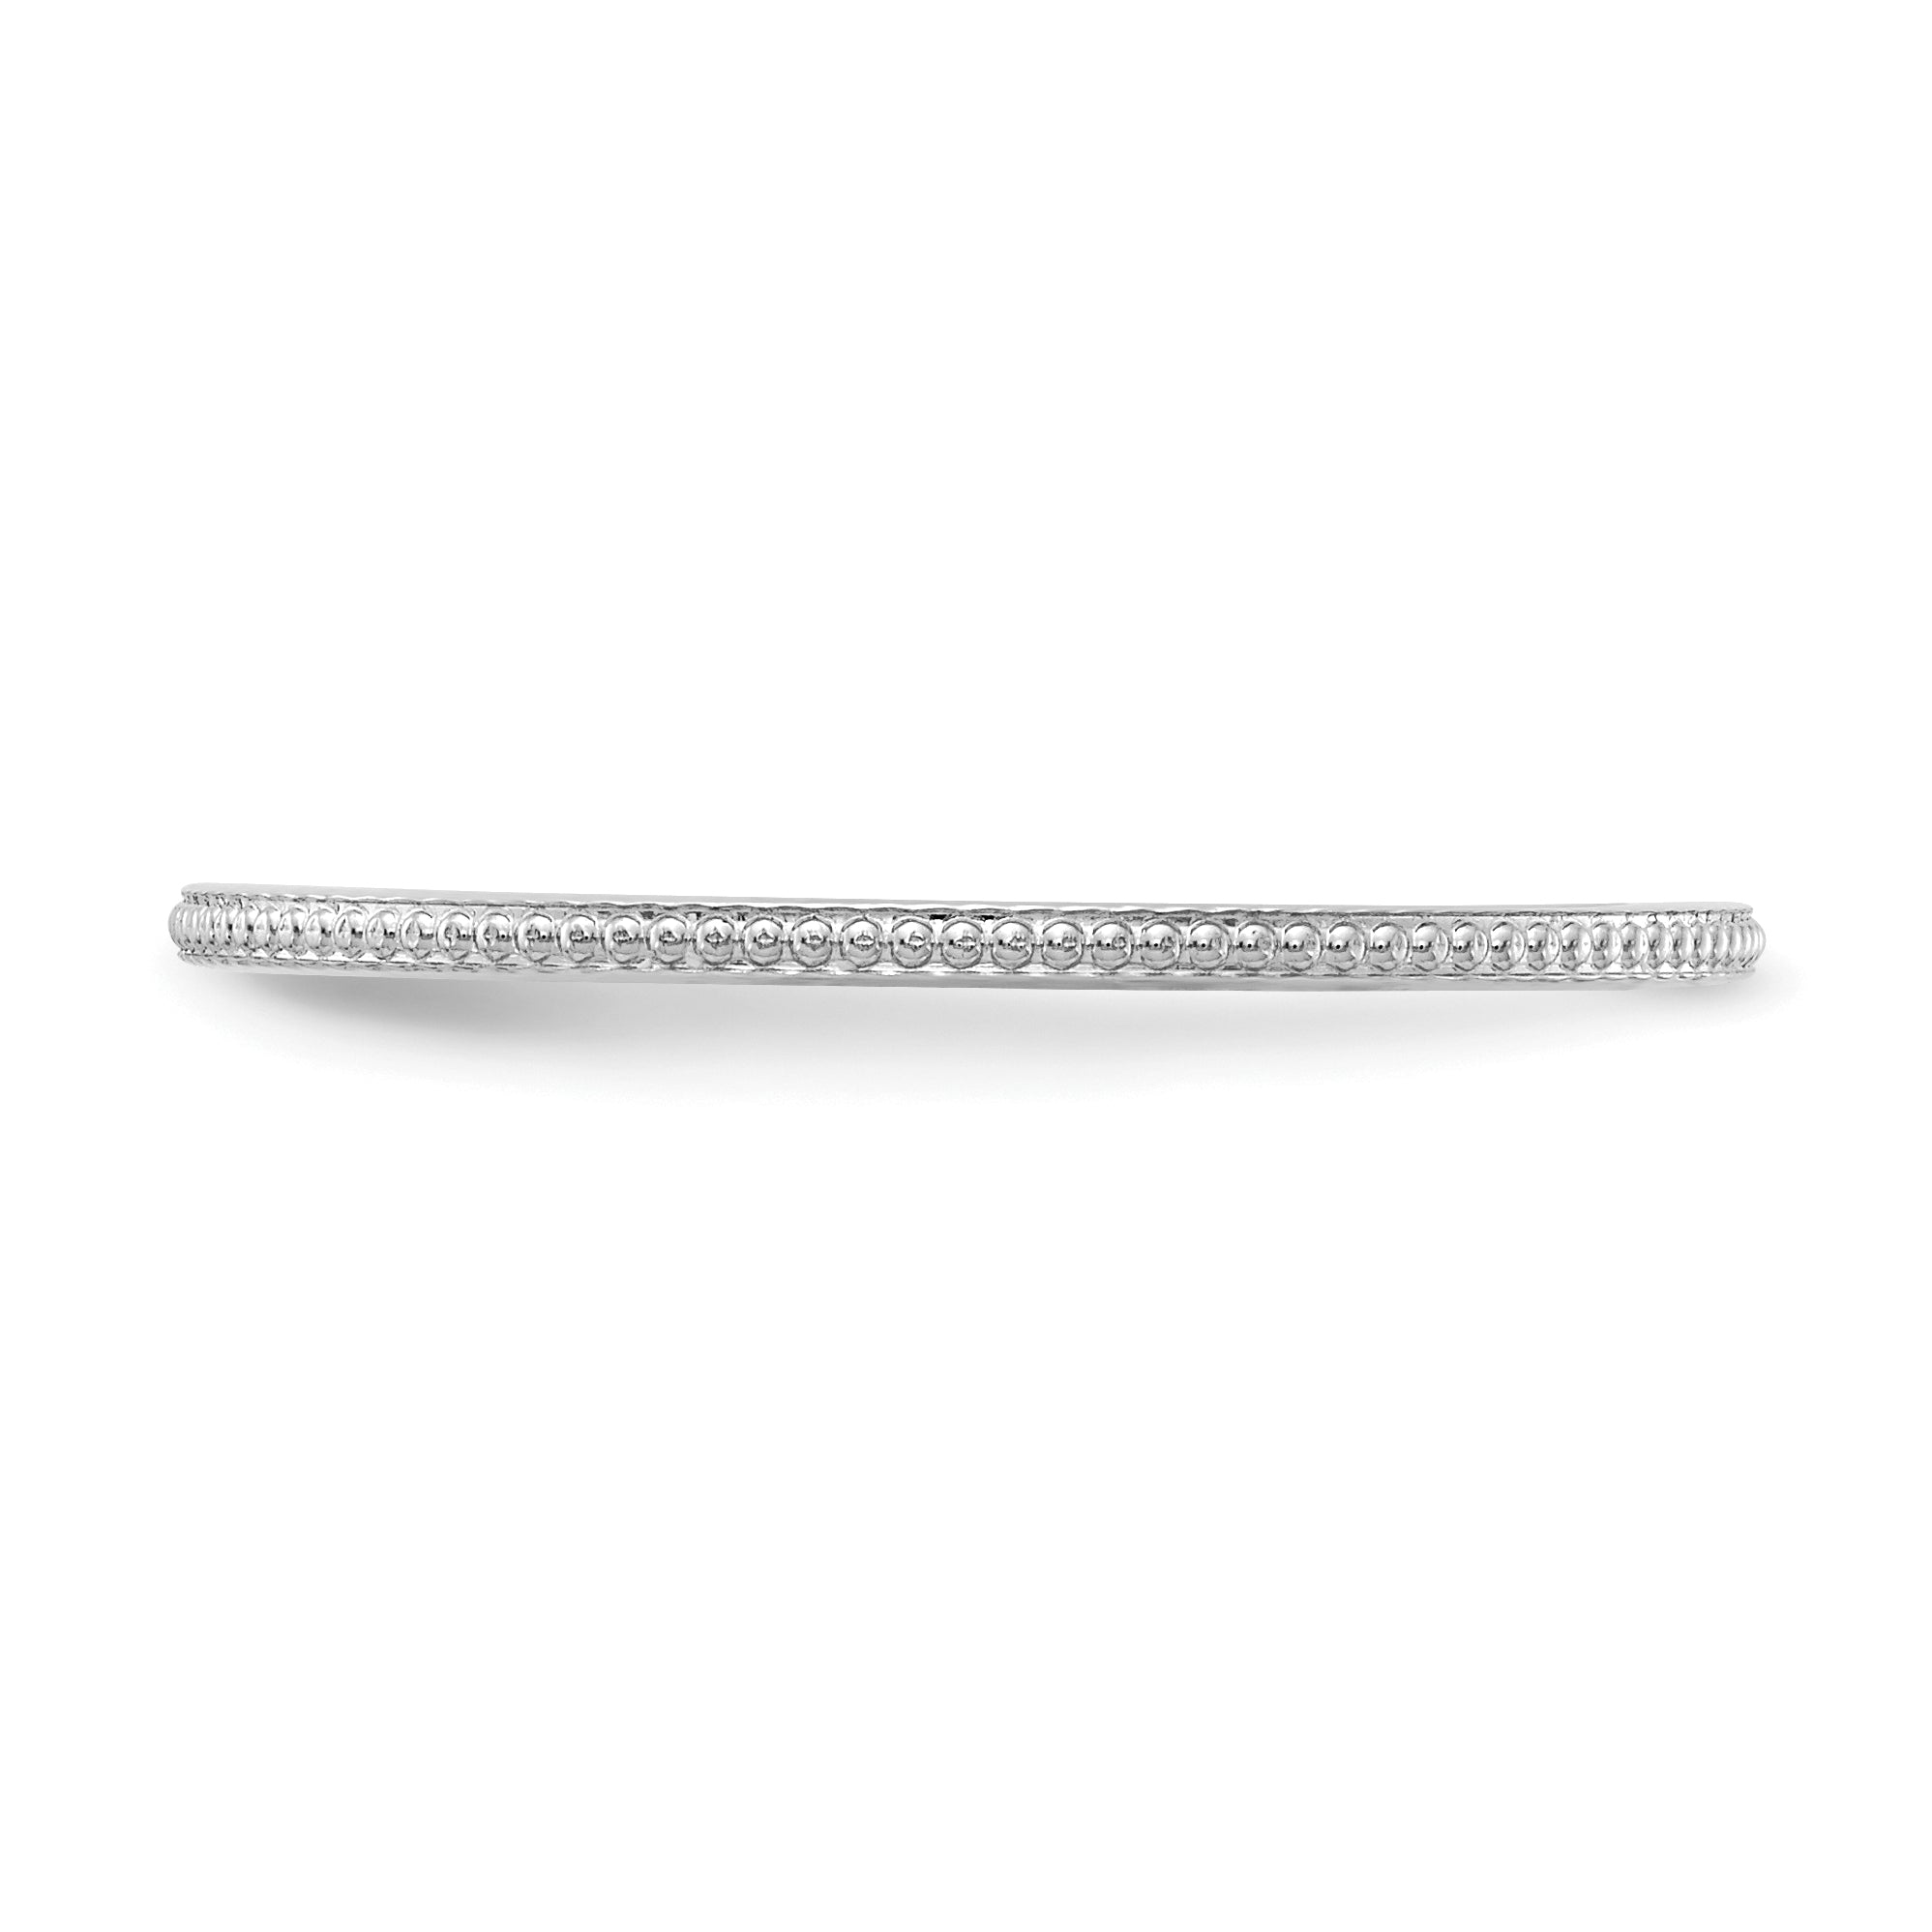 10K White Gold 1.2mm Beaded Stackable Band Size 4